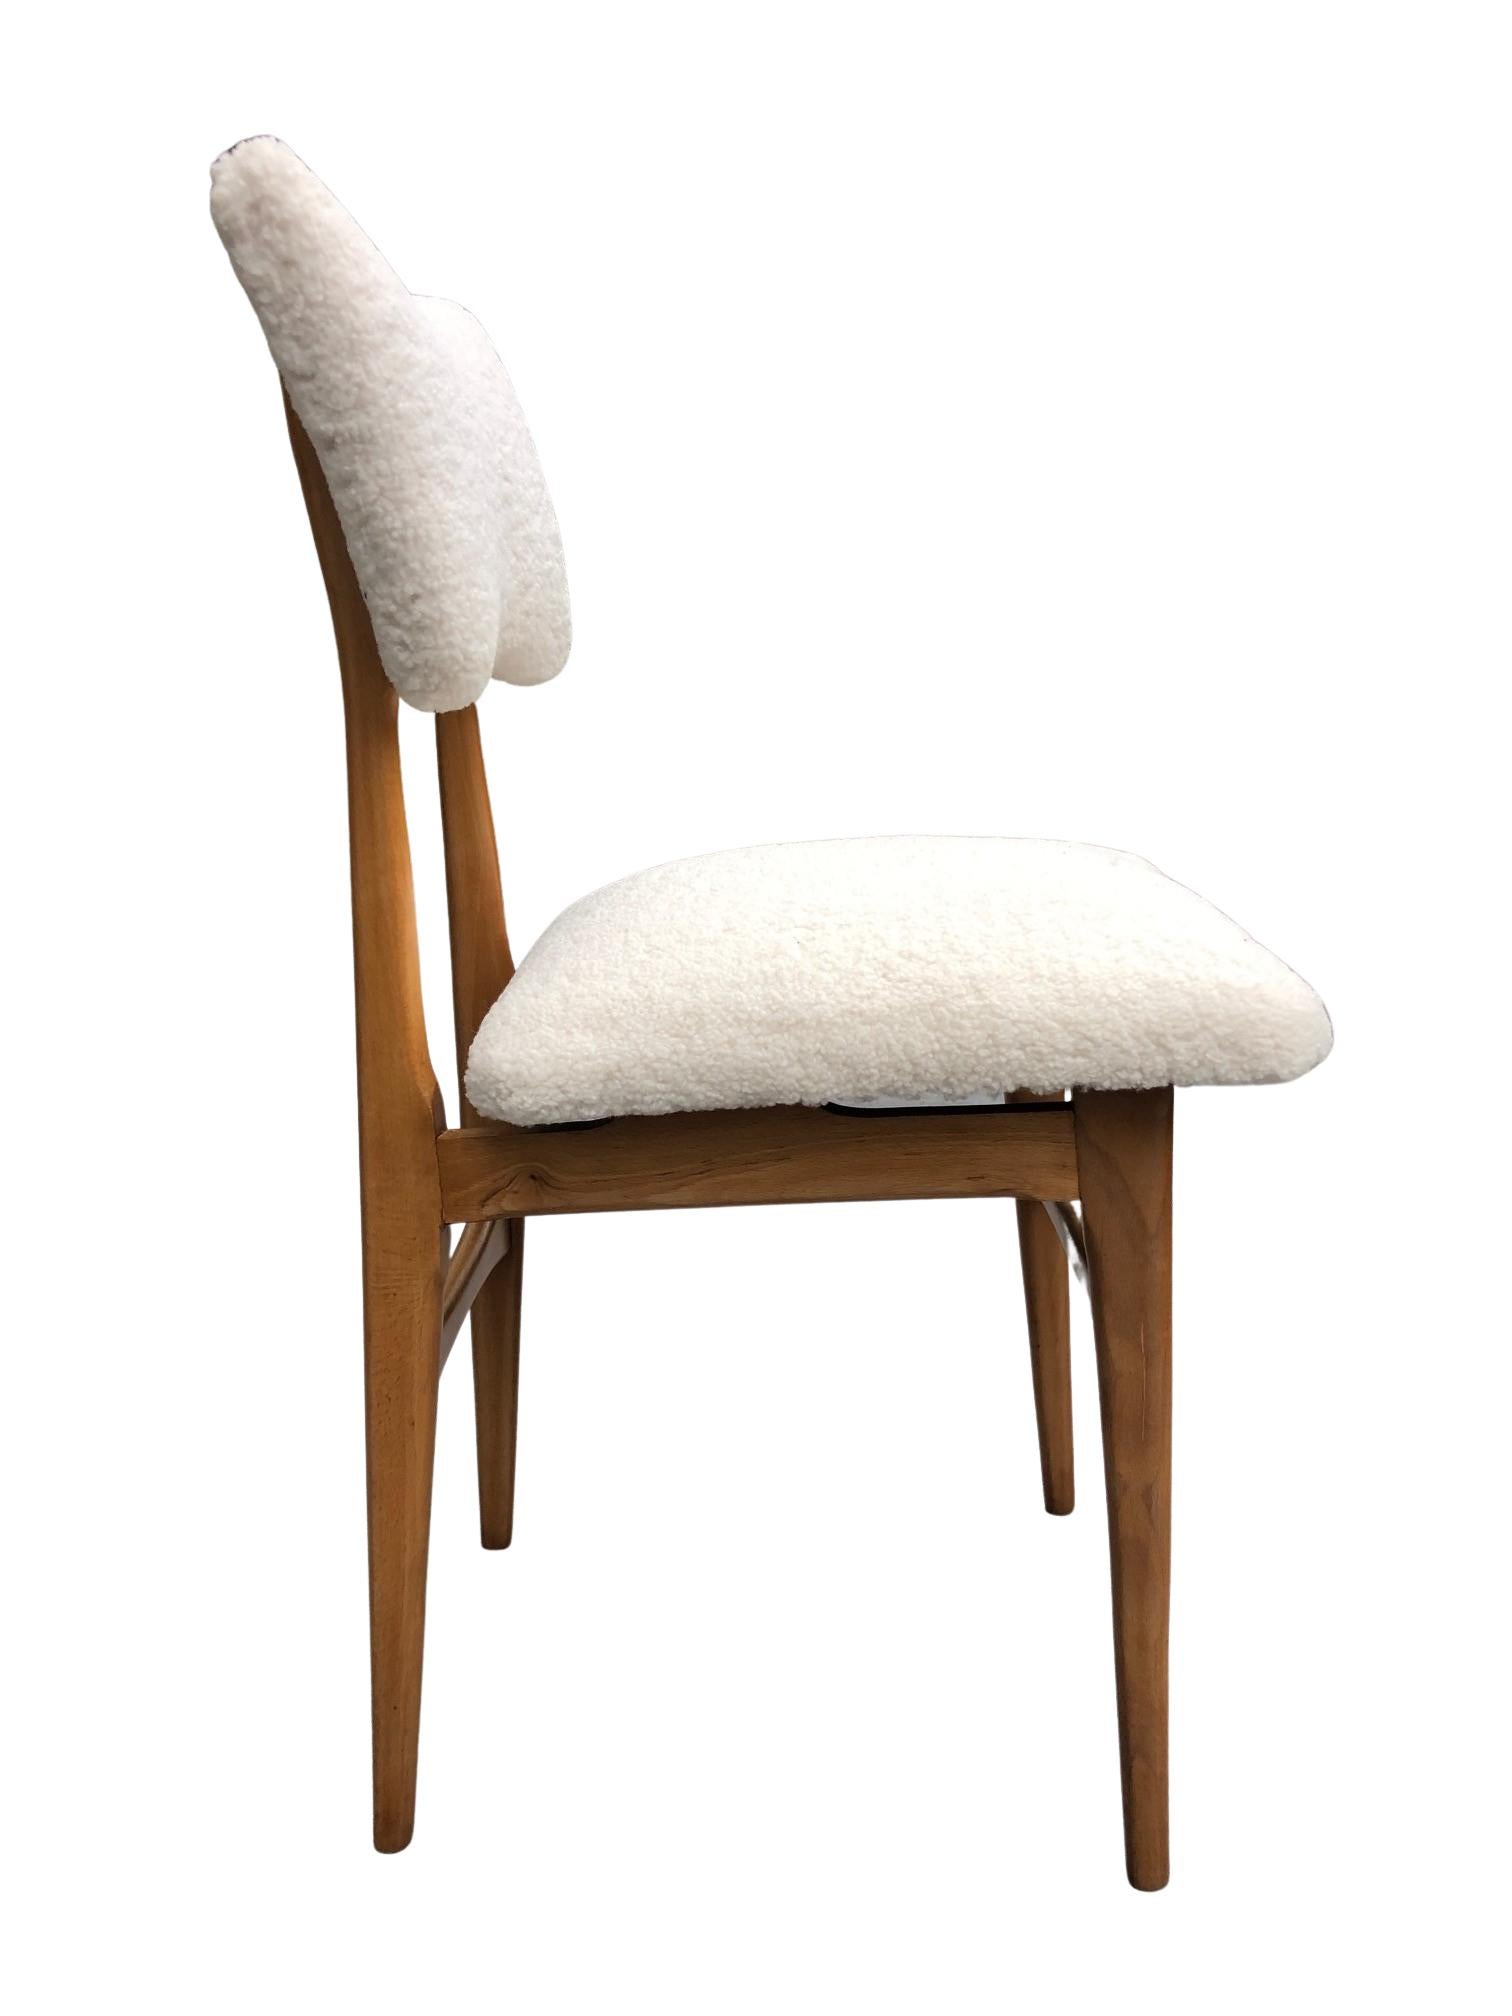 Midcentury Cream Bouclé and Wood Dining Chairs, Europe, 1960s, Set of Four For Sale 5